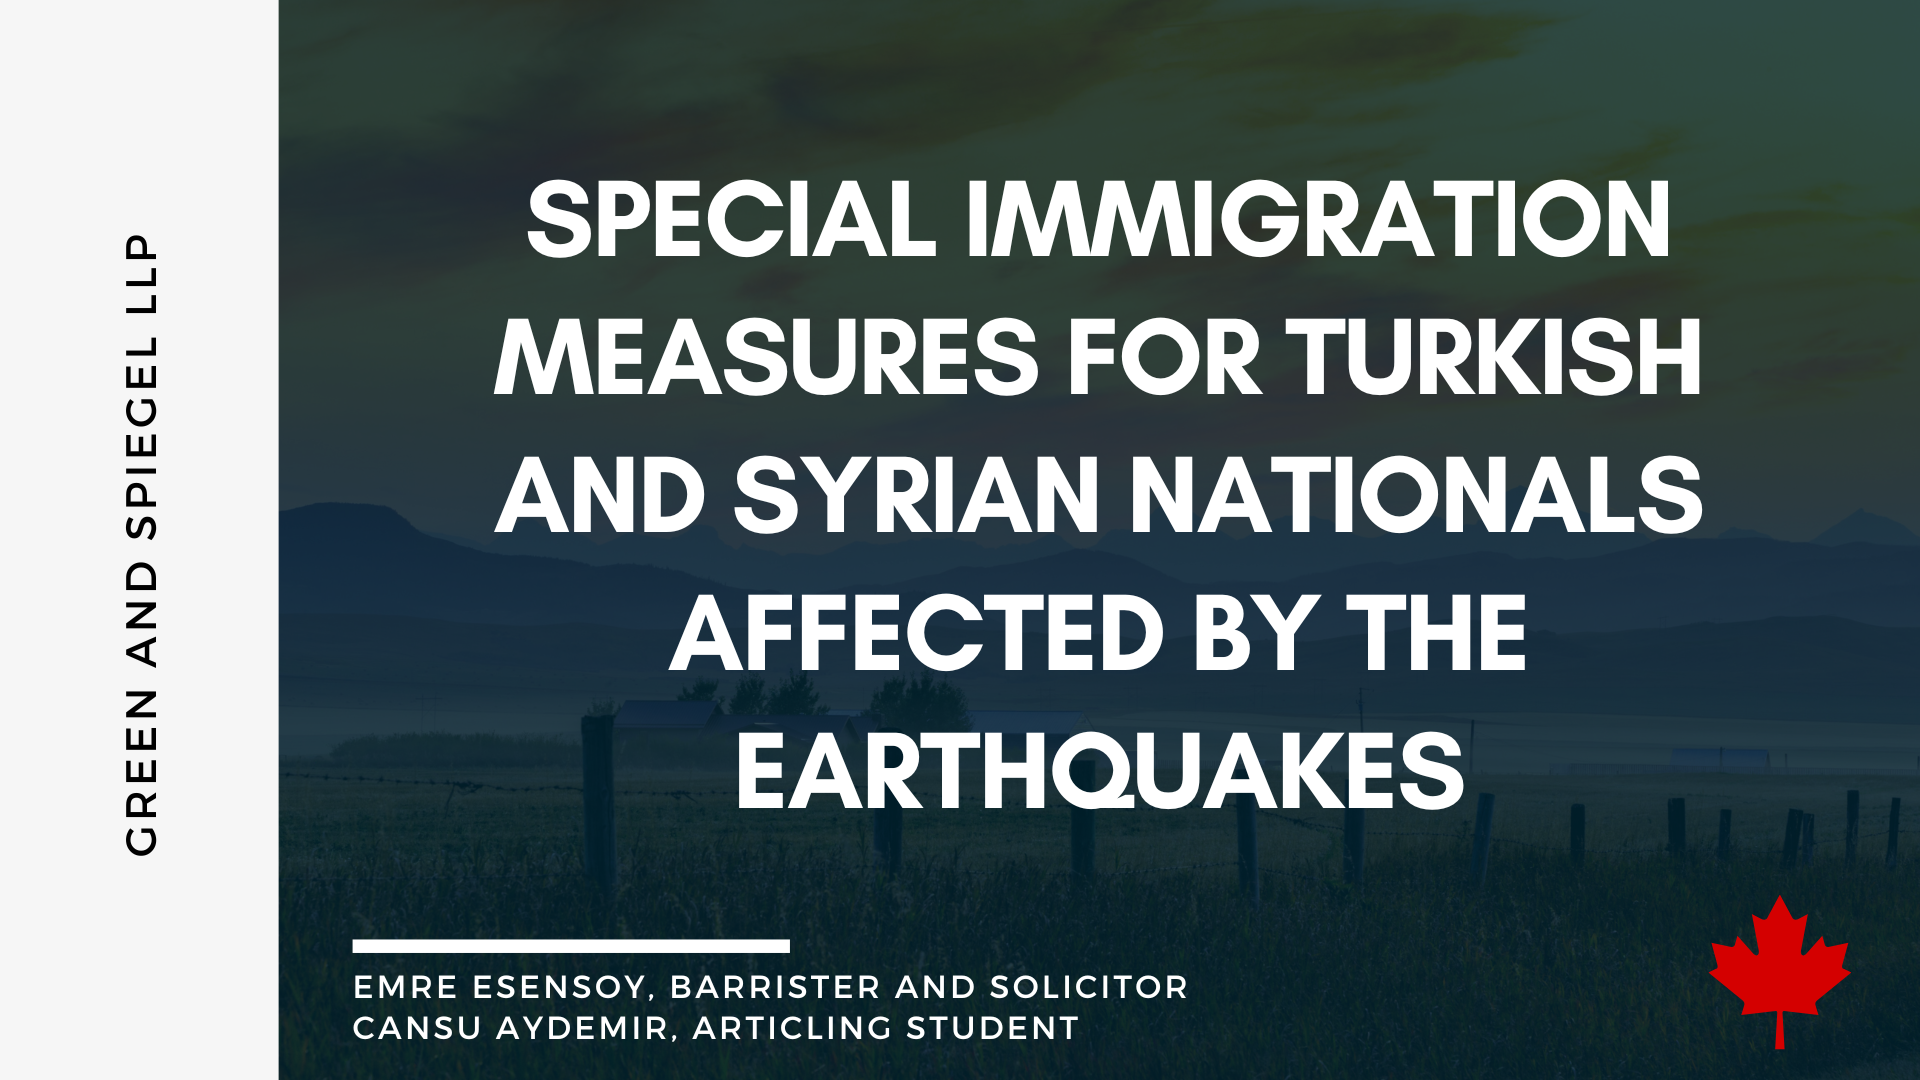 SPECIAL IMMIGRATION MEASURES FOR TURKISH AND SYRIAN NATIONALS AFFECTED BY THE EARTHQUAKES